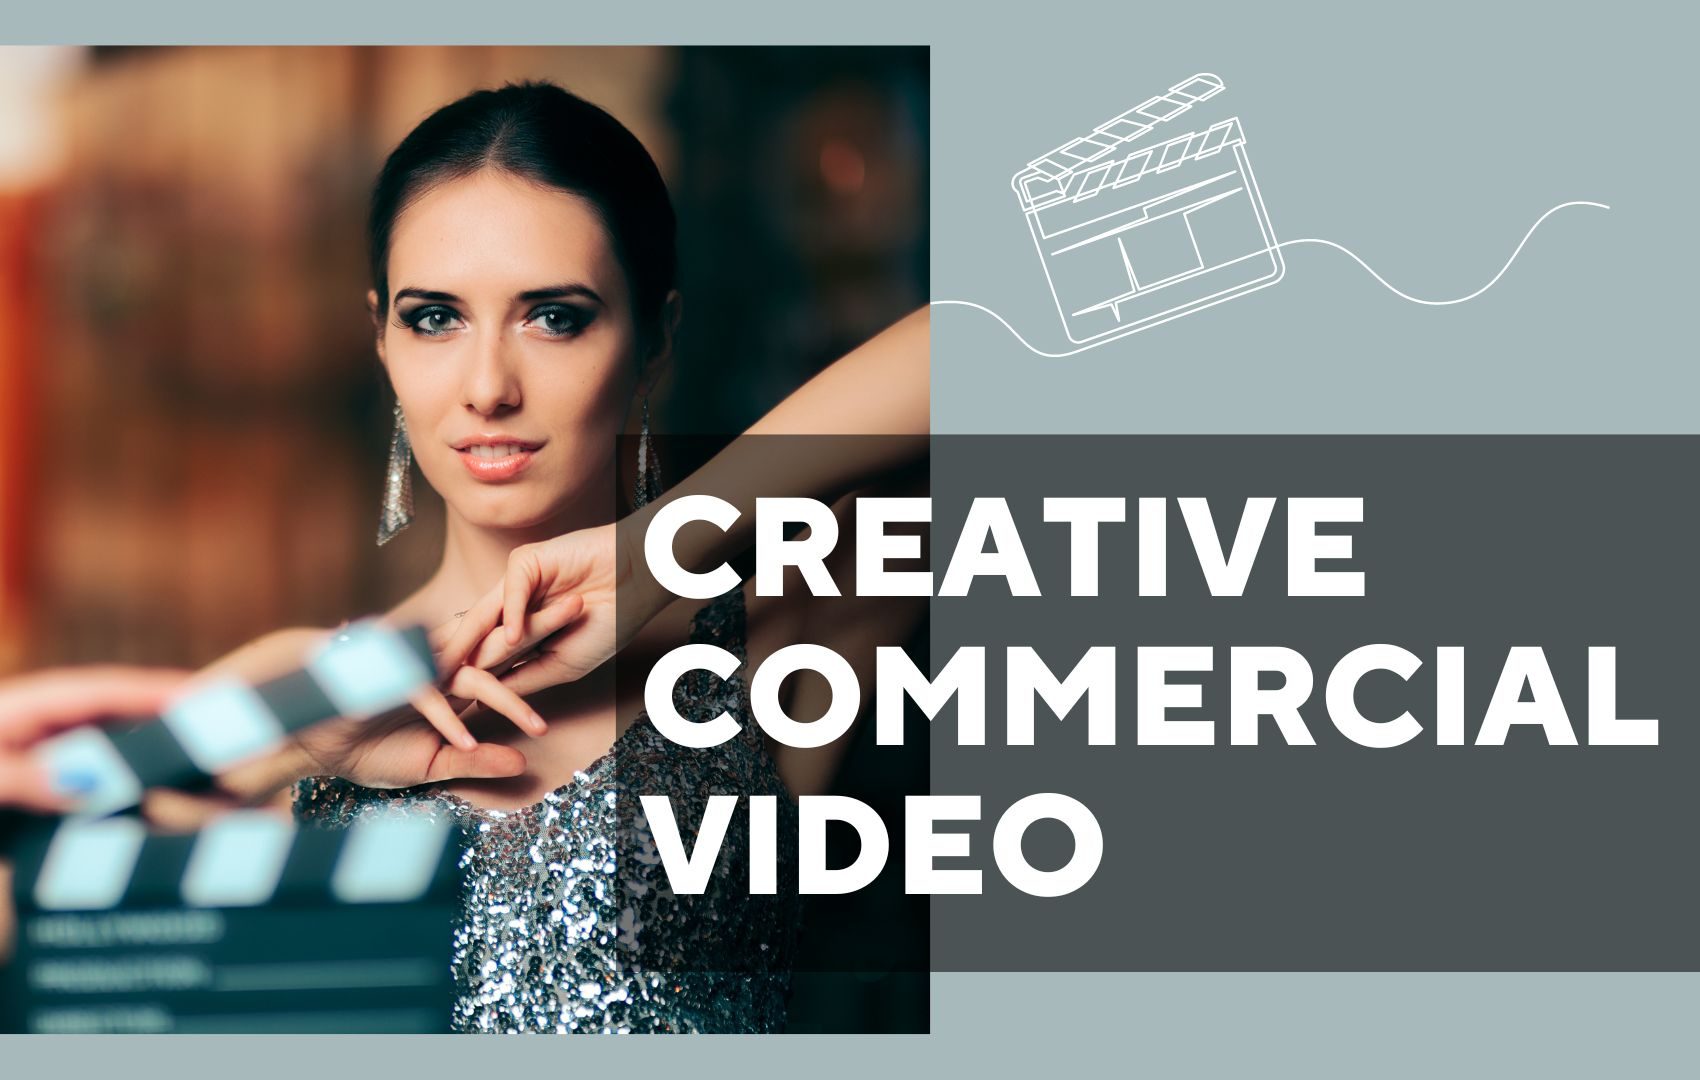 Creative Commercial Video For Your Business